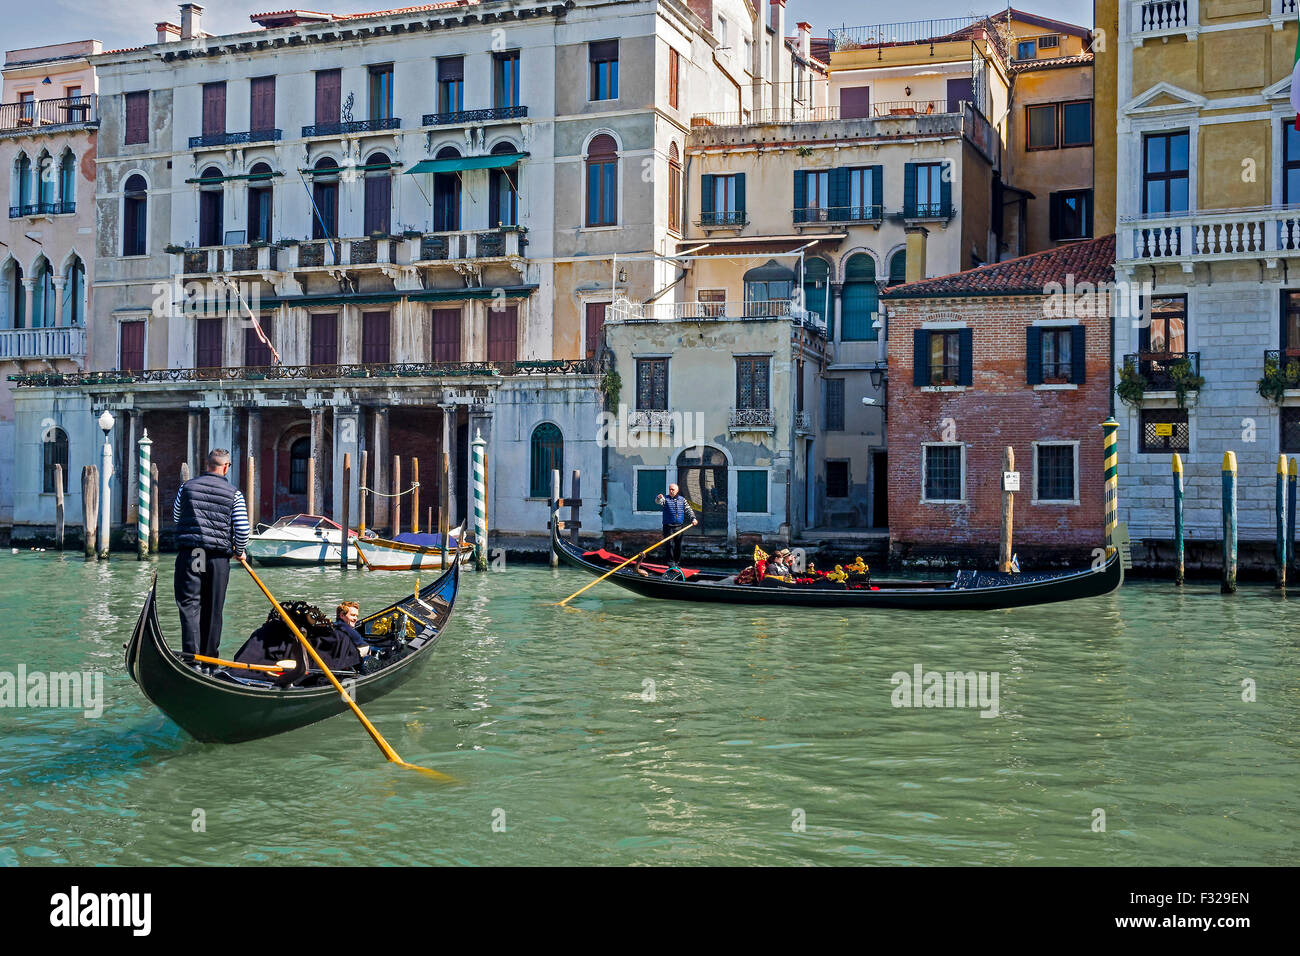 Buildings and Gondolas On The Grand Canal Venice Italy Stock Photo